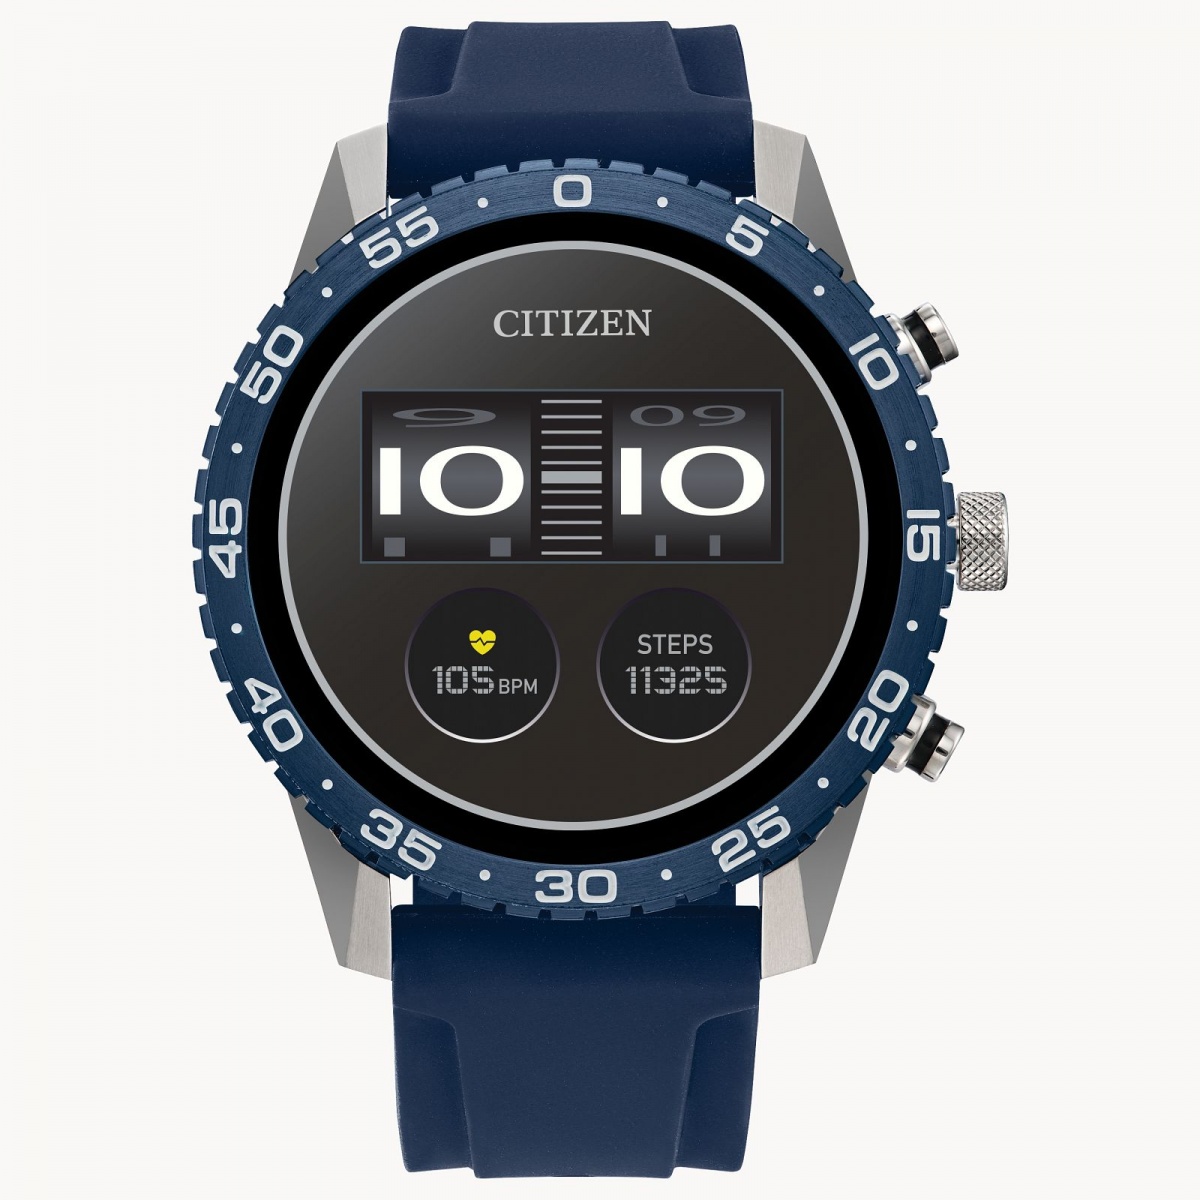 Citizen Watches Launches Latest Smartwatch Collection with NASA Tech